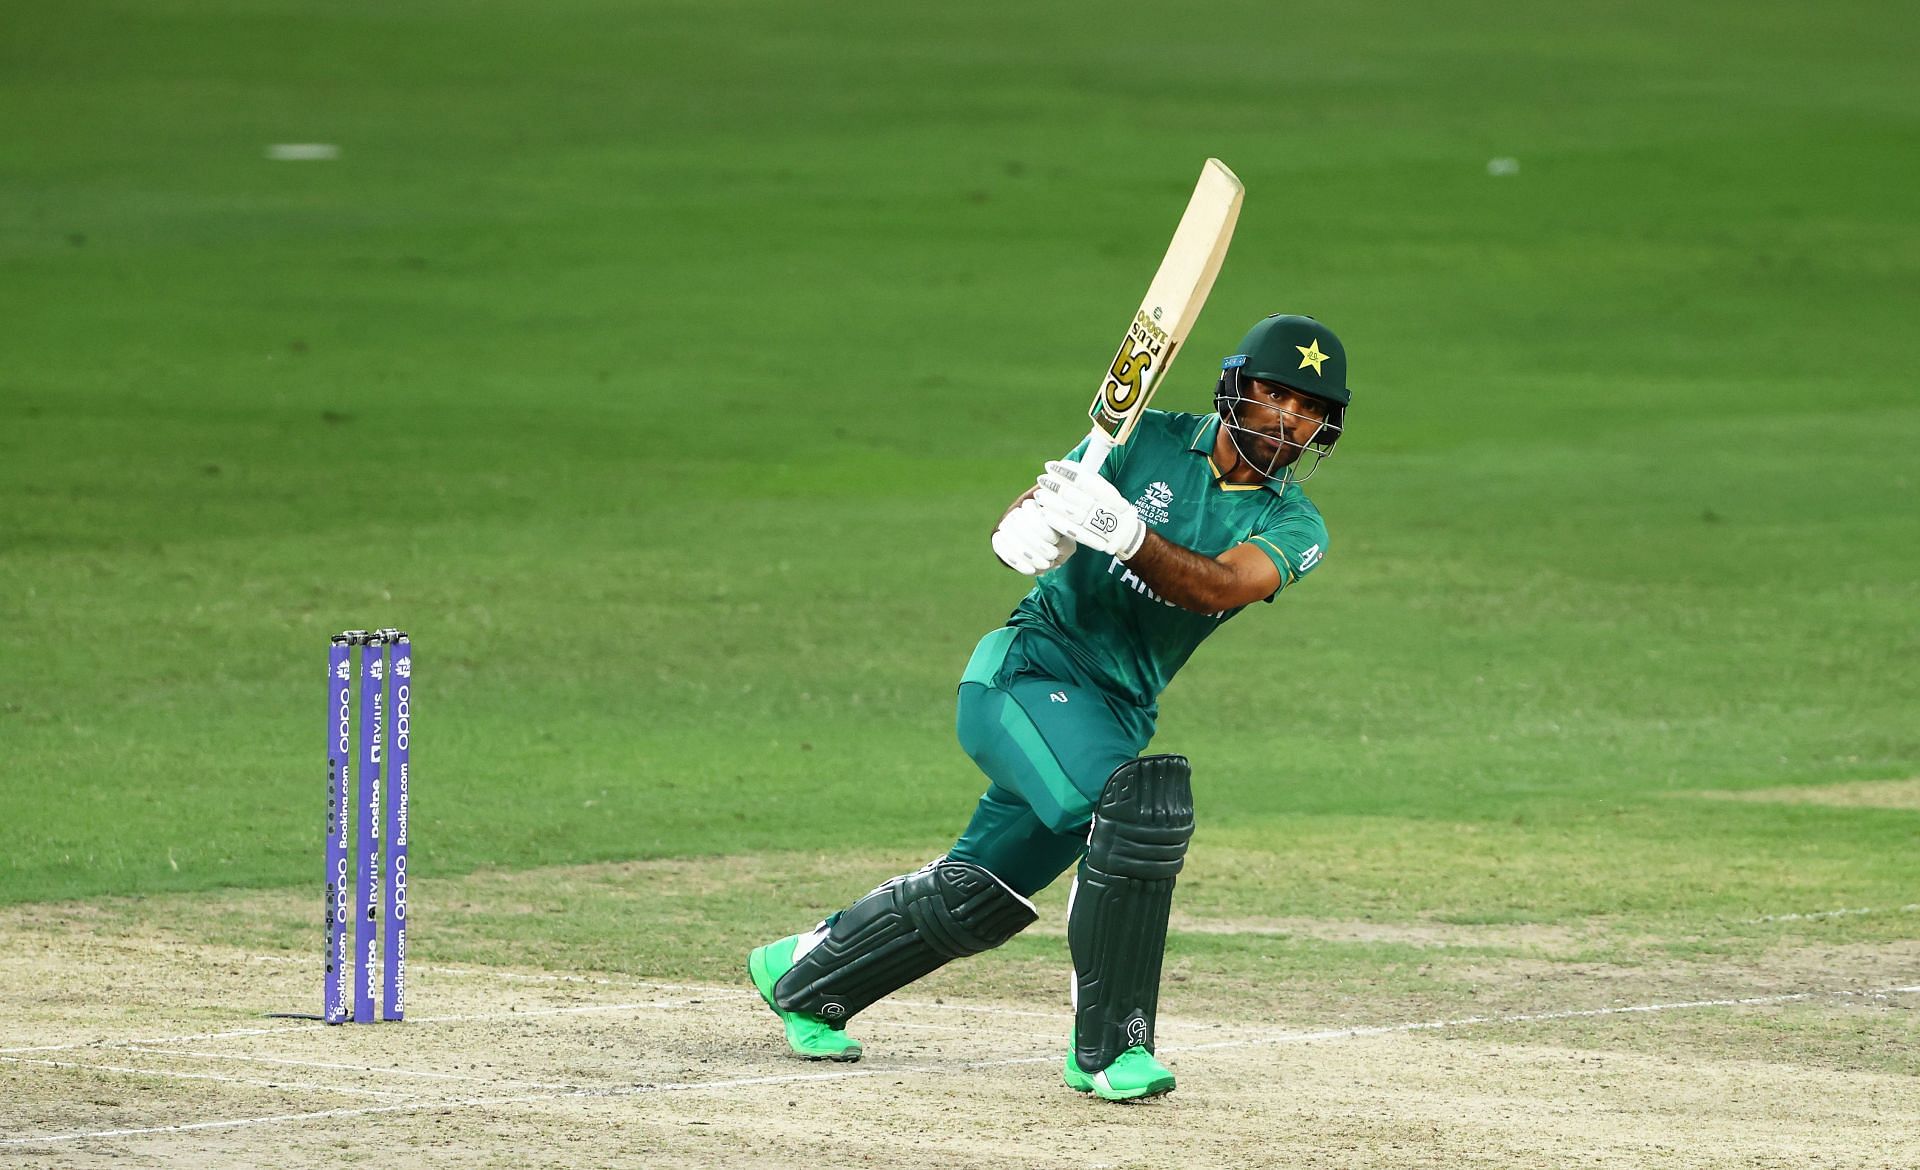 Bangladesh vs Pakistan 3rd T20I Probable XIs, match prediction, live streaming, weather forecast and pitch report